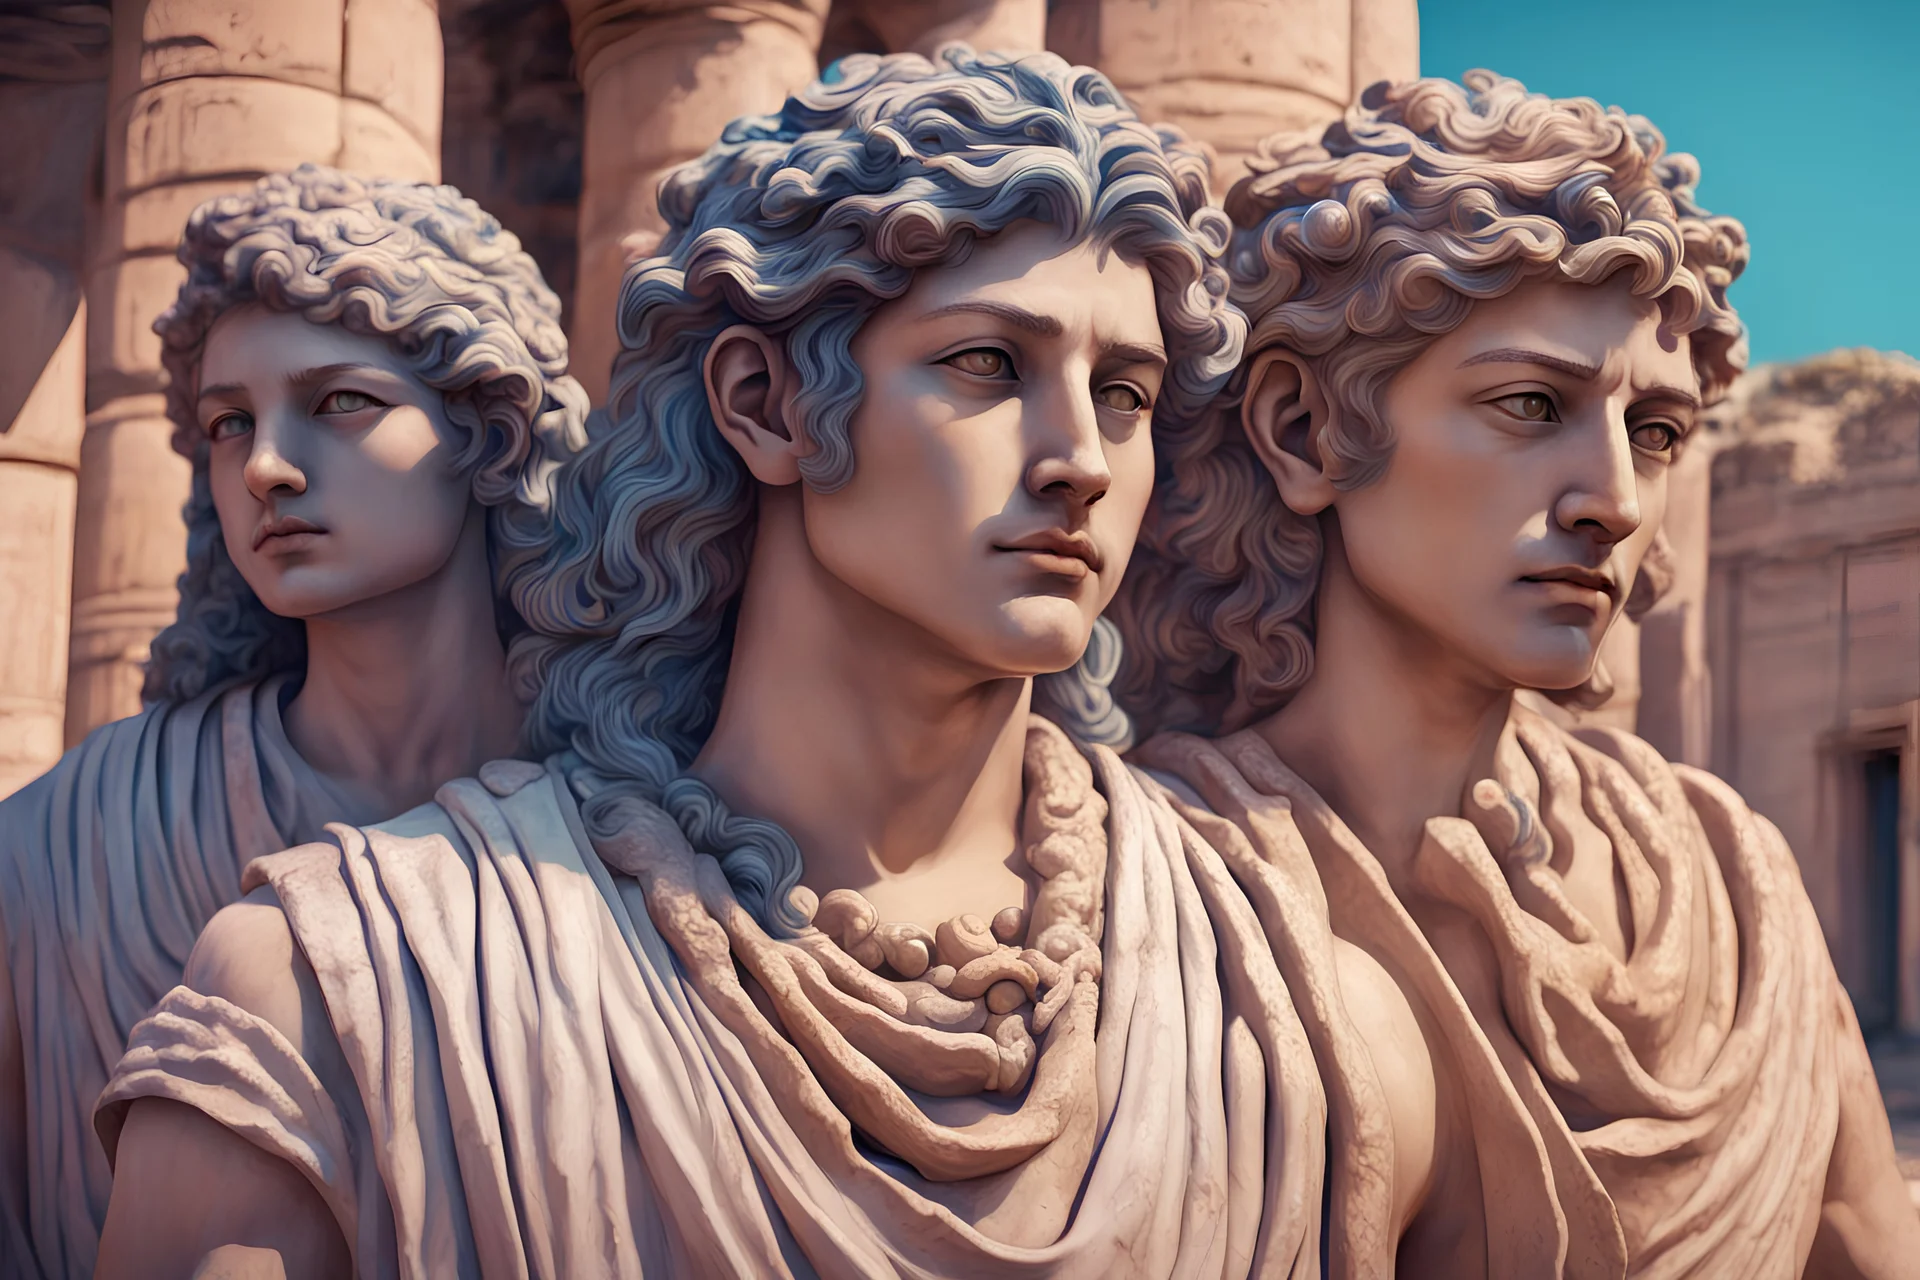 very vaporwave anime style beautiful look and feel real like lifelike ancient classical look and feel portrait of a very almost lifelike very mediterranean italian looking Ancient Etruscan men and women brought to life based om ancient Etruscam art and sculptures looking alive full of life colore realistic